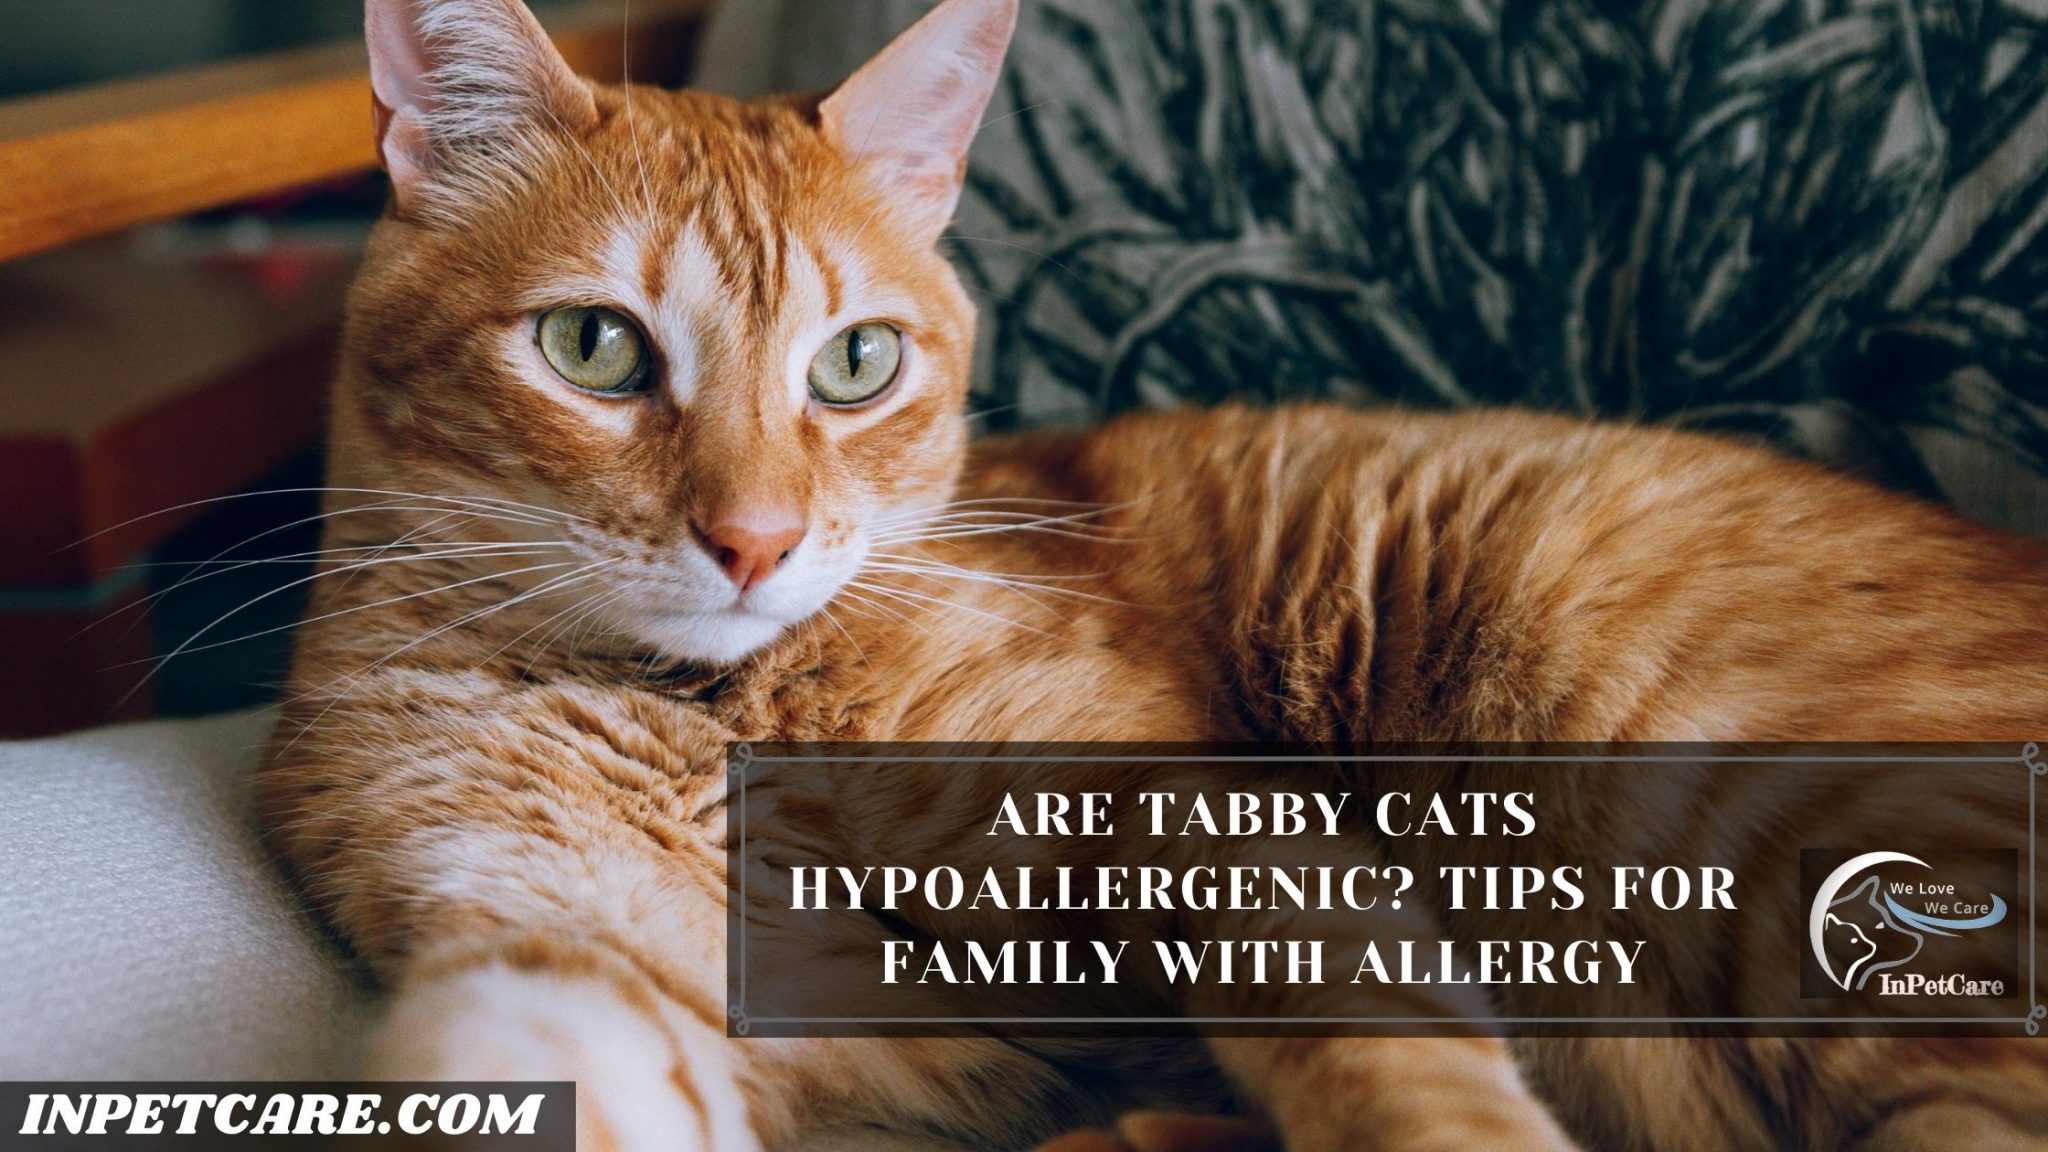 Are Tabby Cats Hypoallergenic? Tips For Family With Allergy